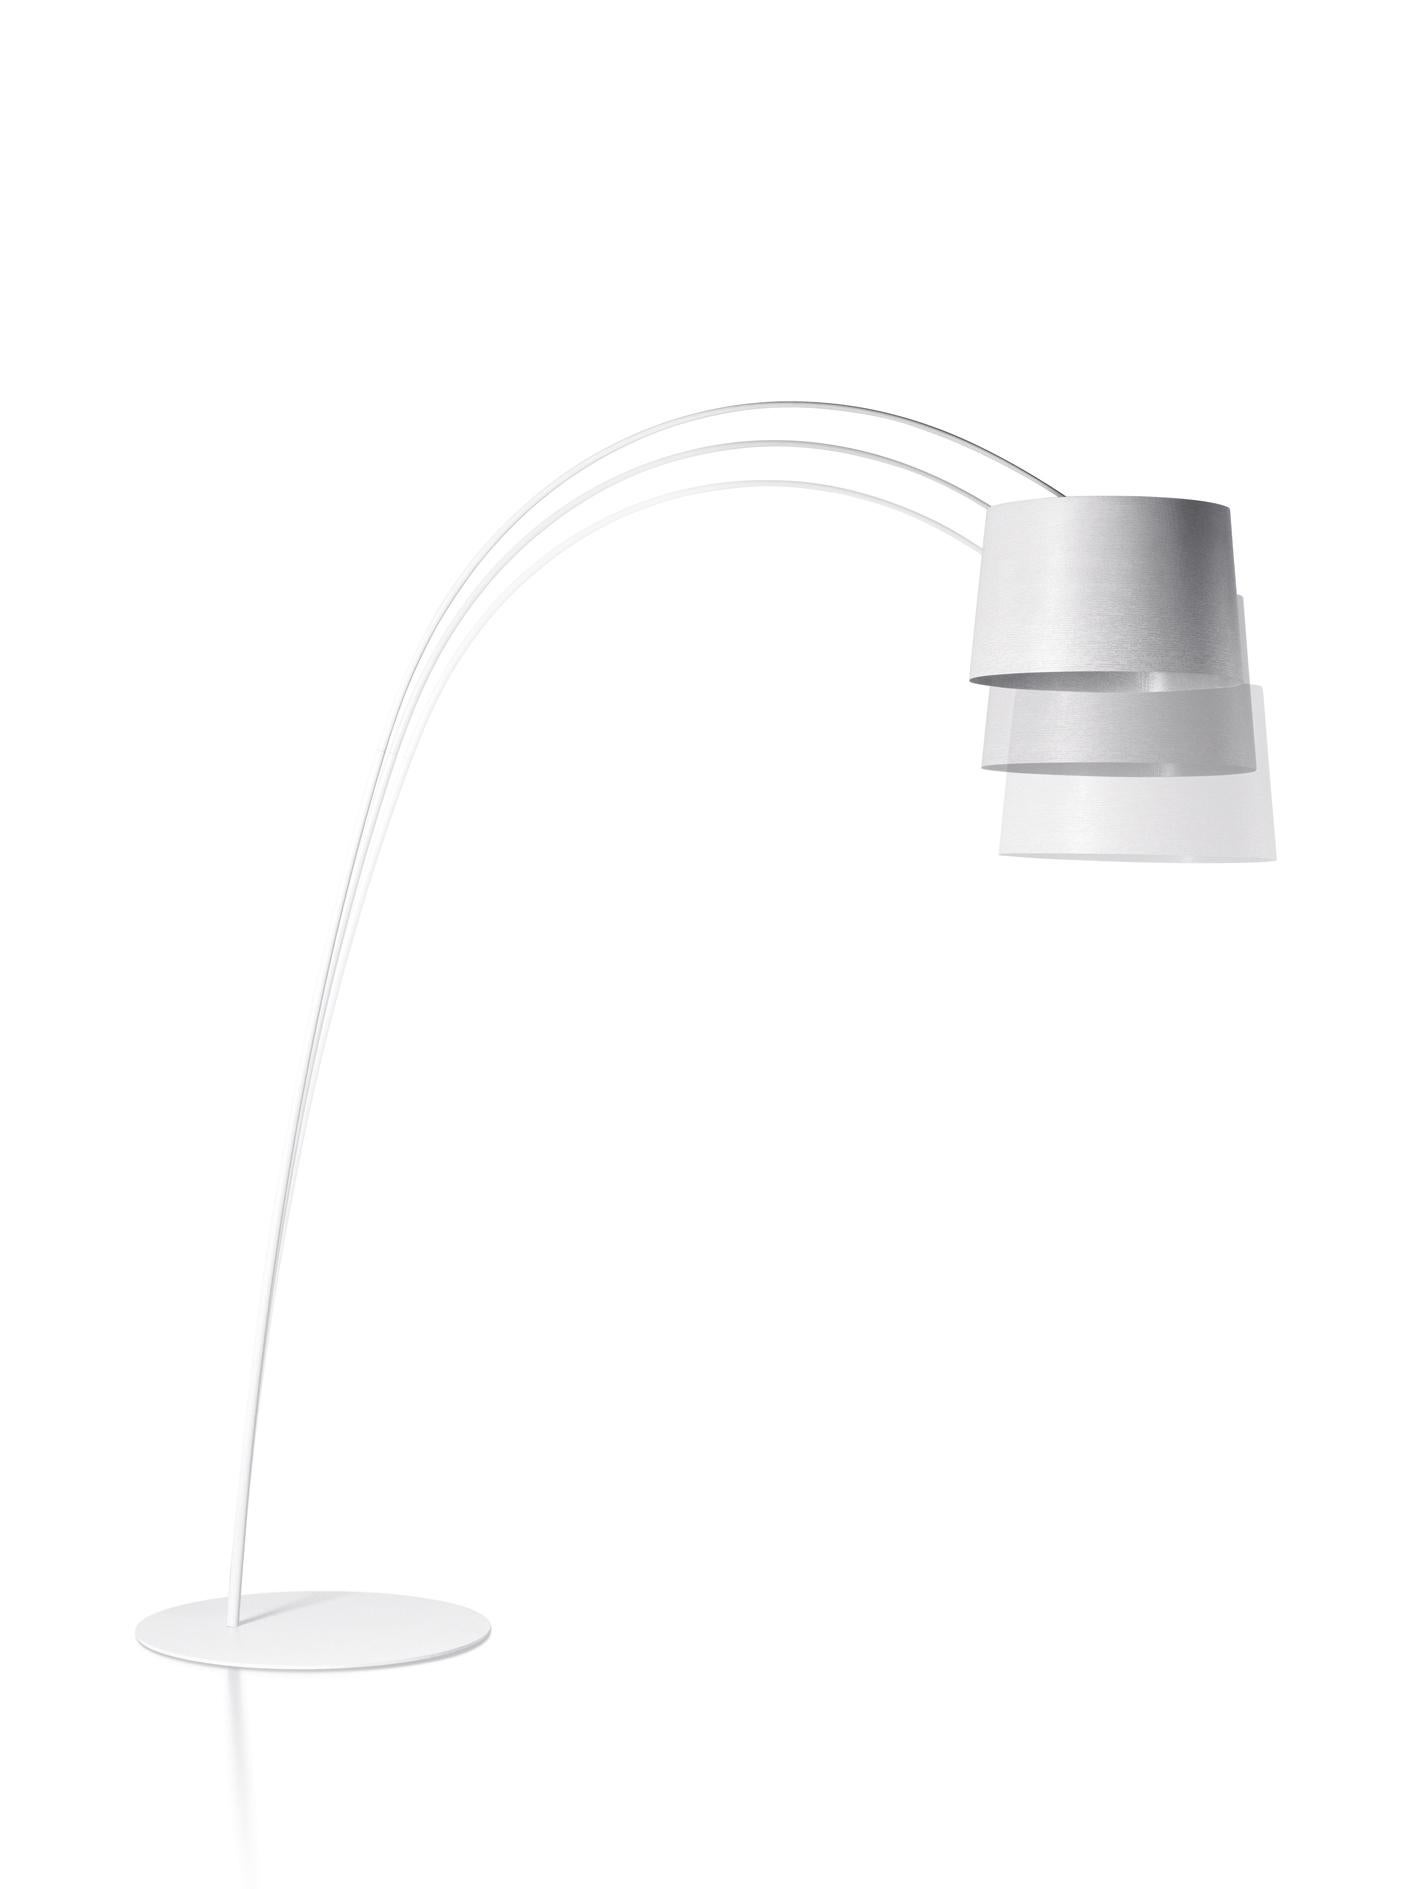 Floor lamp with direct and indirect light. Diffuser and rod made of fiberglass–based composite material and liquid coated. Translucent polycarbonate upper diffuser disc, PMMA lower diffuser disc with polyprismatic internal surface. Epoxy powder